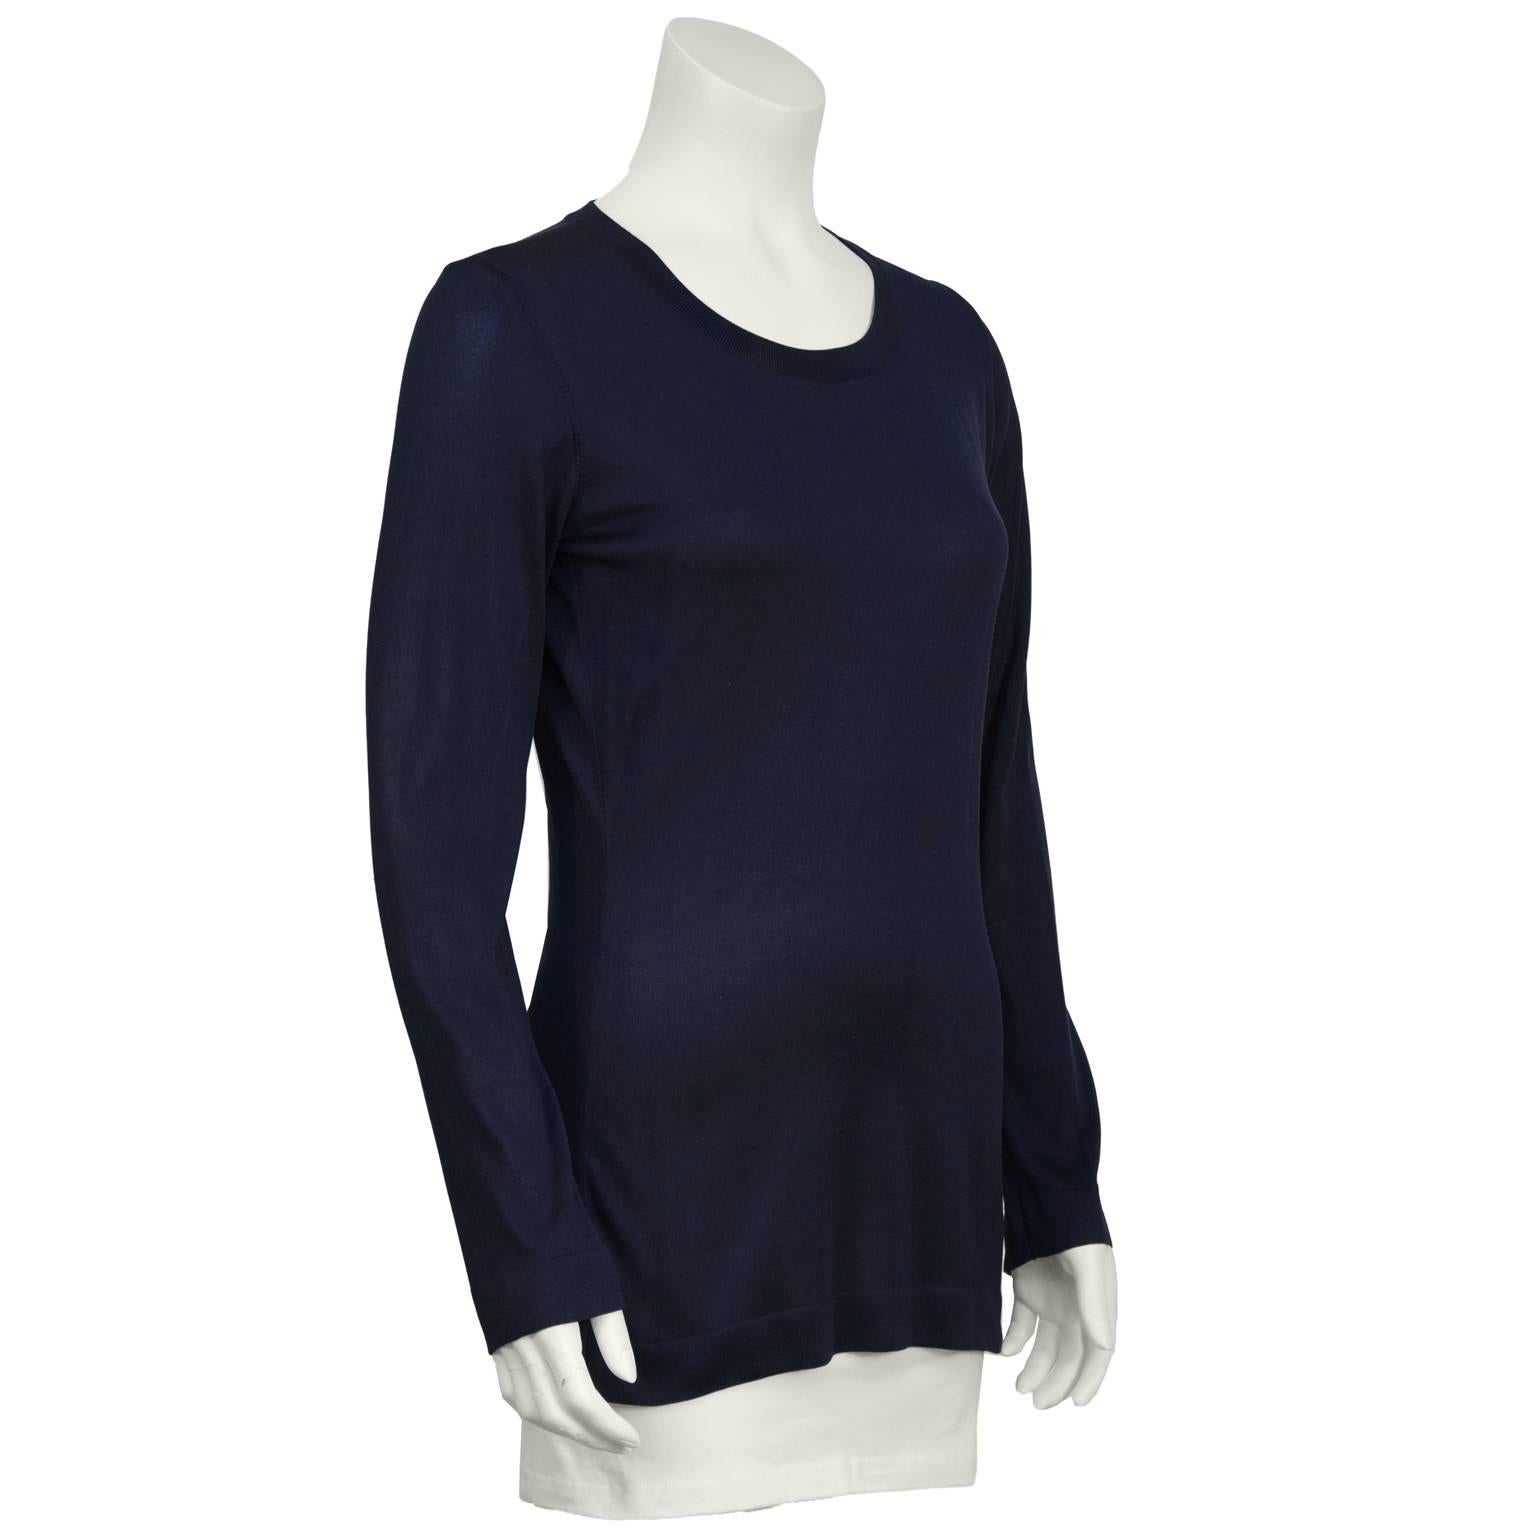 1990's Chanel navy classic long sleeve cotton knit top. Crew neckline, with a small single resin CC button fastening at the back. A great non black staple piece for every wardrobe. Excellent condition. Fits like a US 4-6.